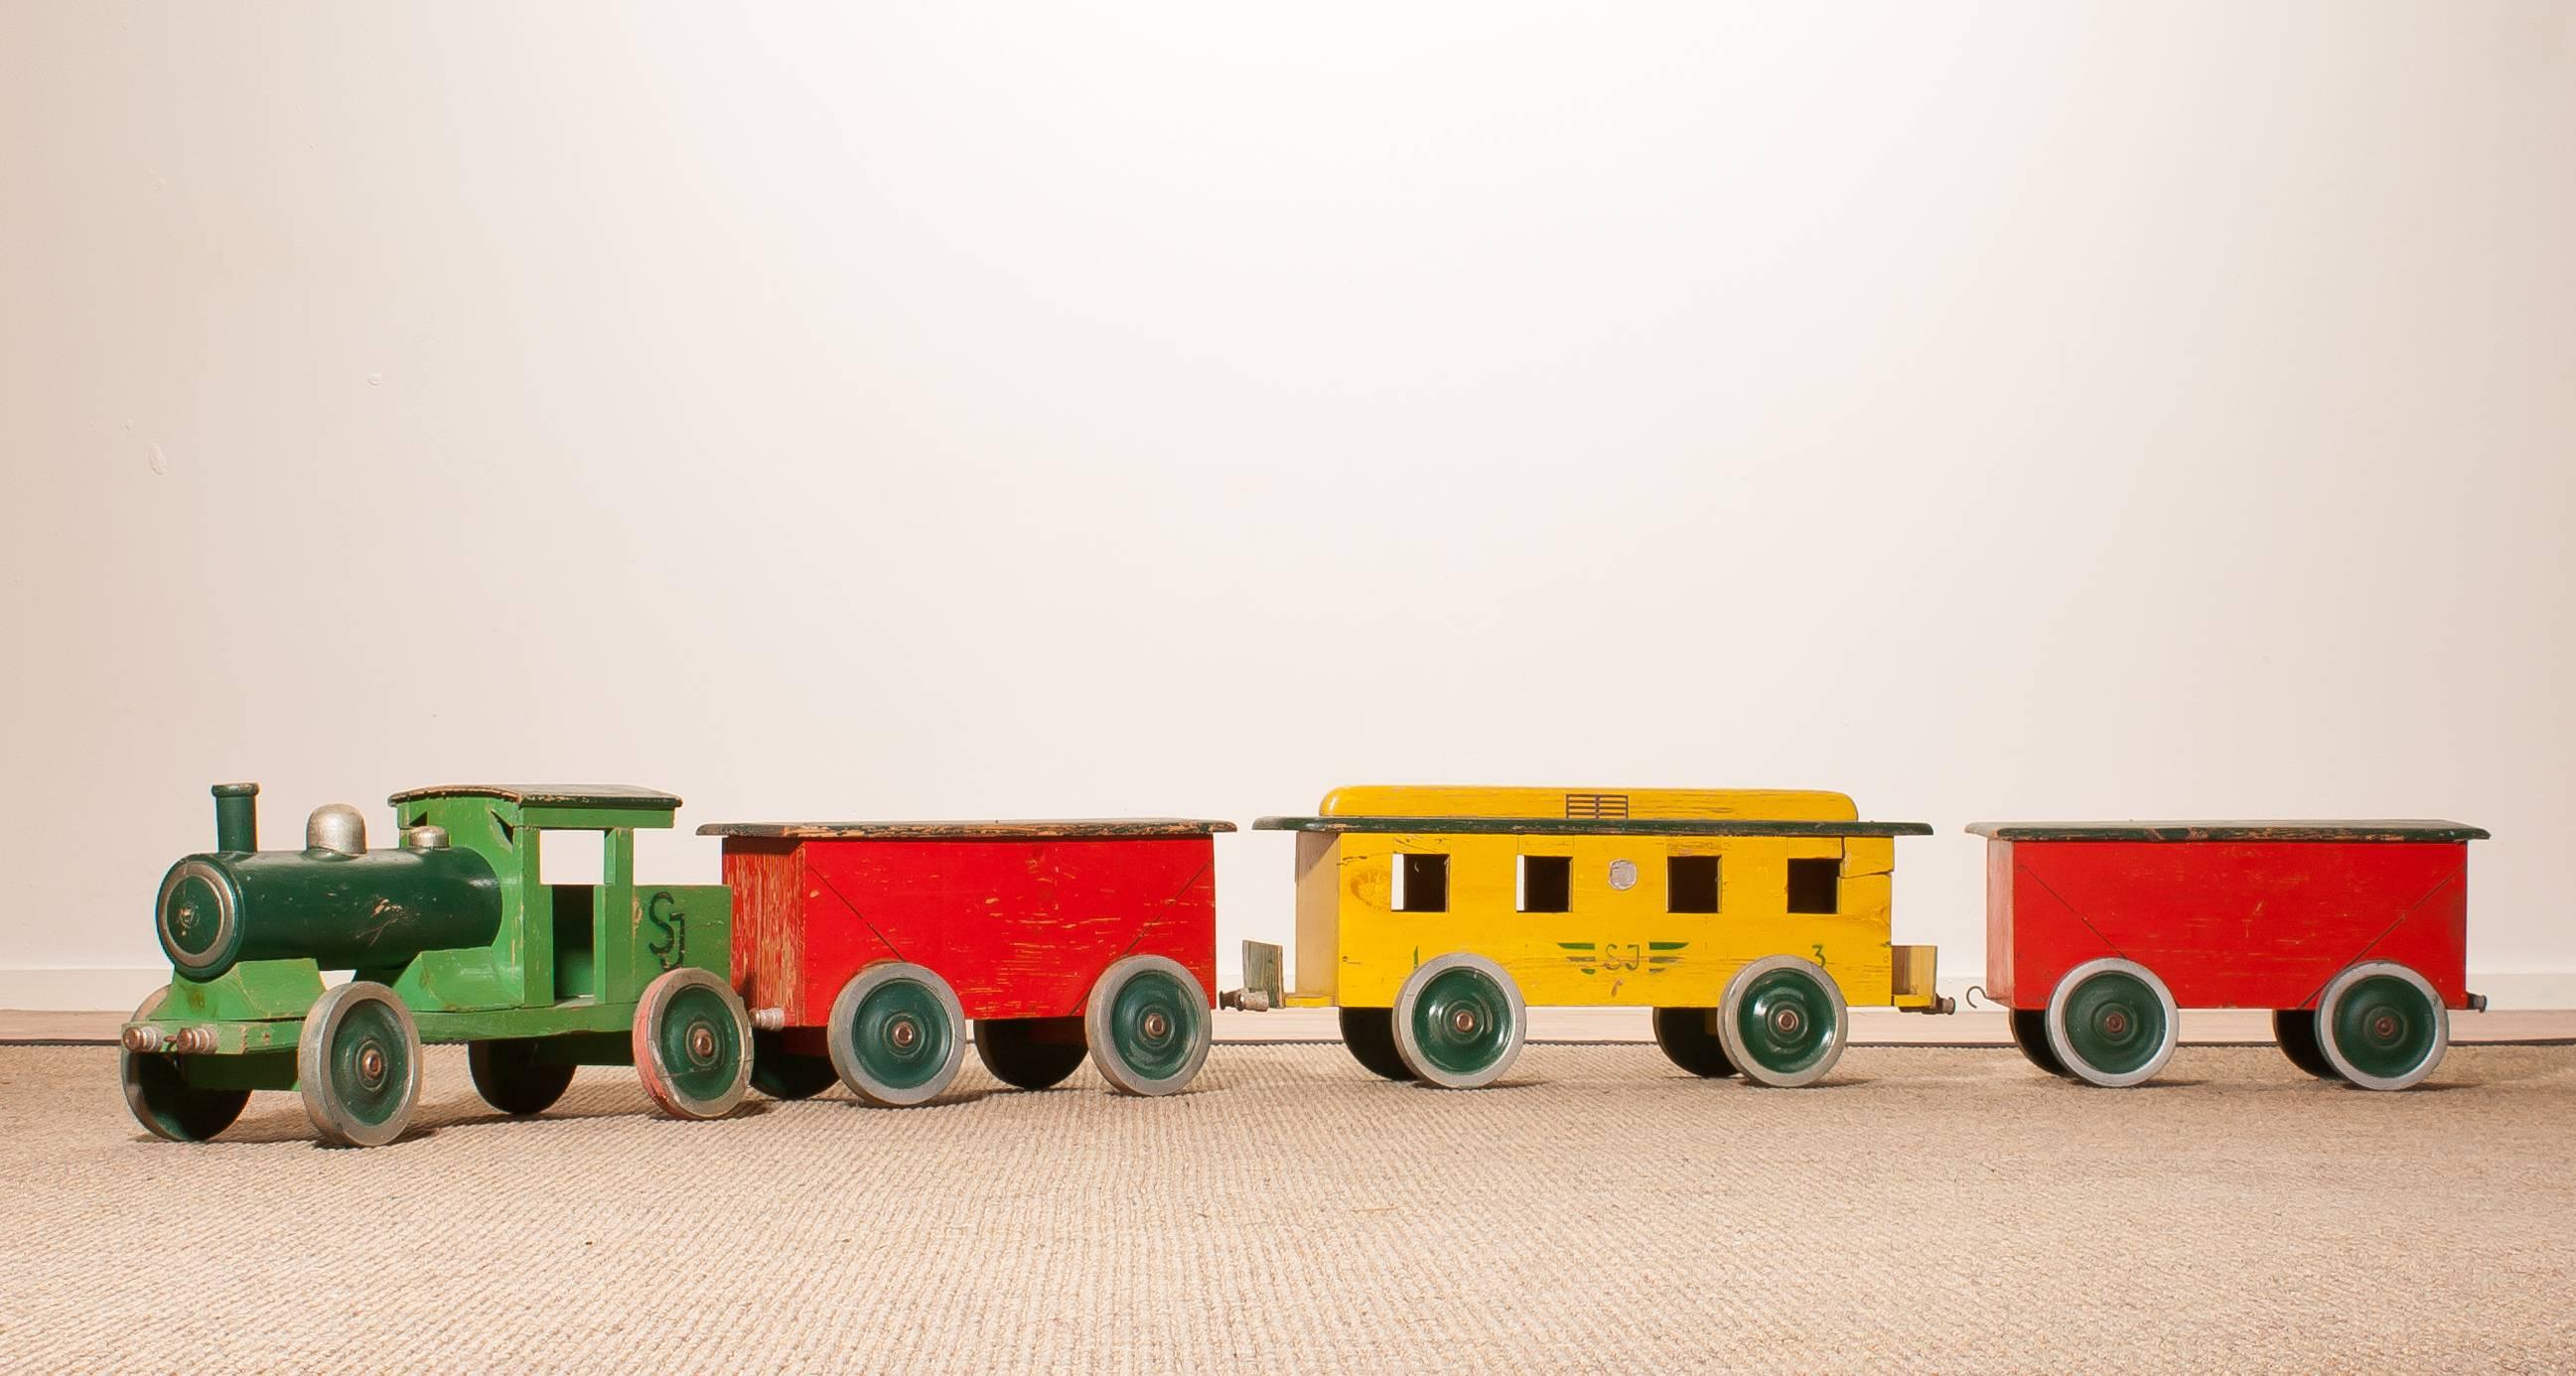 Very adoring large wooden toy train.
This fun train consists of three carriages and a locomotive.
The train is made of pine wood and tagged with punched plate with 'Torsha Traindustri '.
It is in a nice used condition,
Period 1930s
Dimensions :